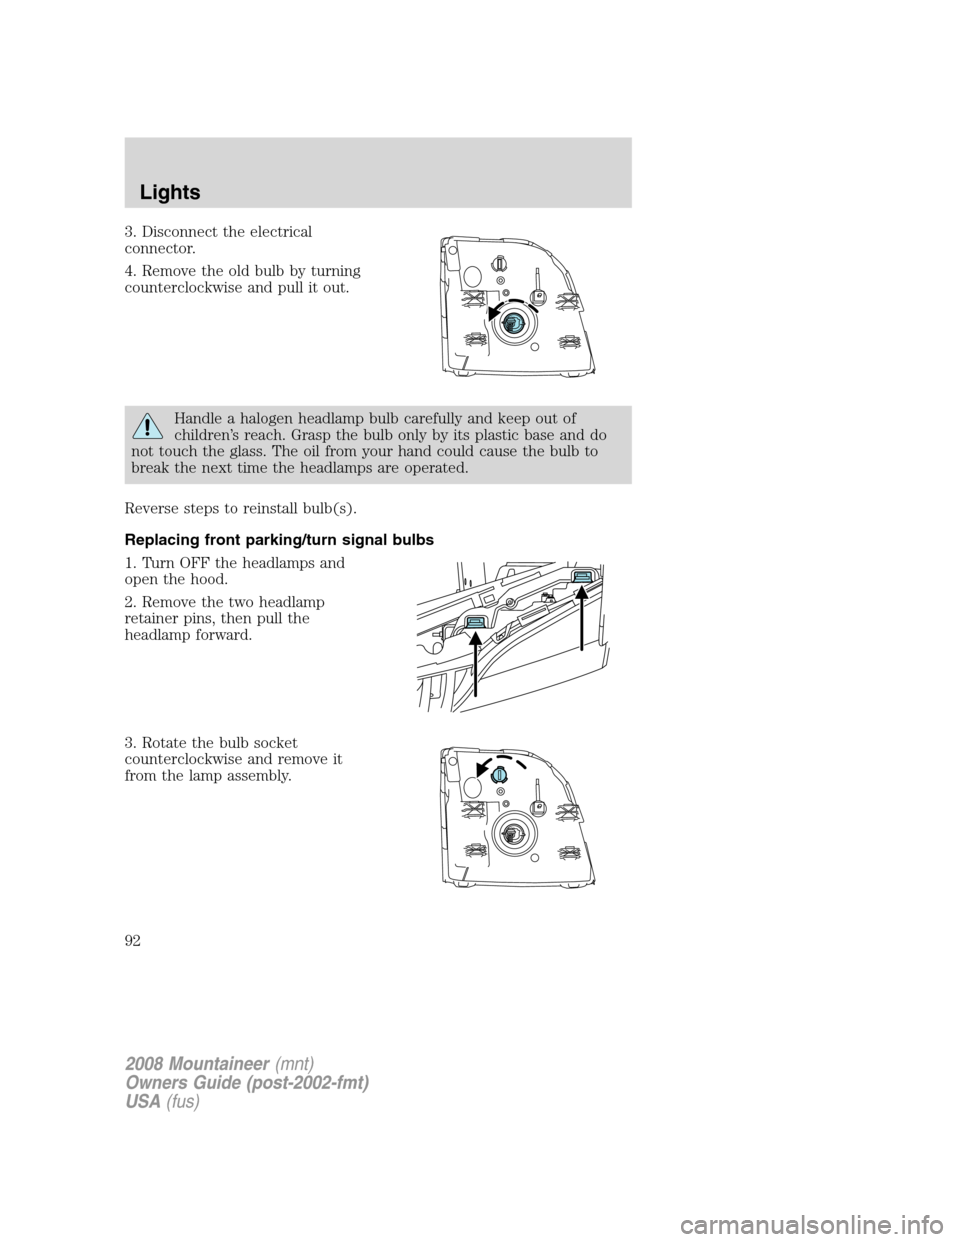 Mercury Mountaineer 2008  Owners Manuals 3. Disconnect the electrical
connector.
4. Remove the old bulb by turning
counterclockwise and pull it out.
Handle a halogen headlamp bulb carefully and keep out of
children’s reach. Grasp the bulb 